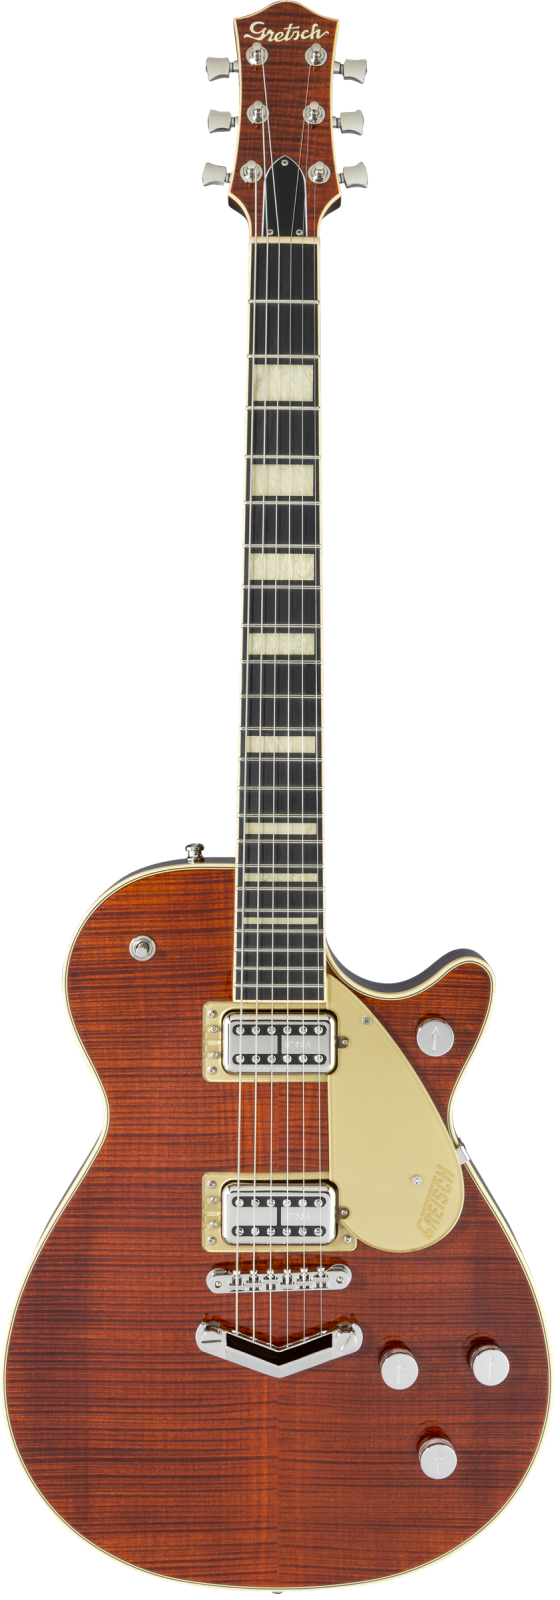 Gretsch G6228FM Players Edition Jet BT with V-Stoptail and Flame Maple - Ebony Fingerboard, Bourbon Stain